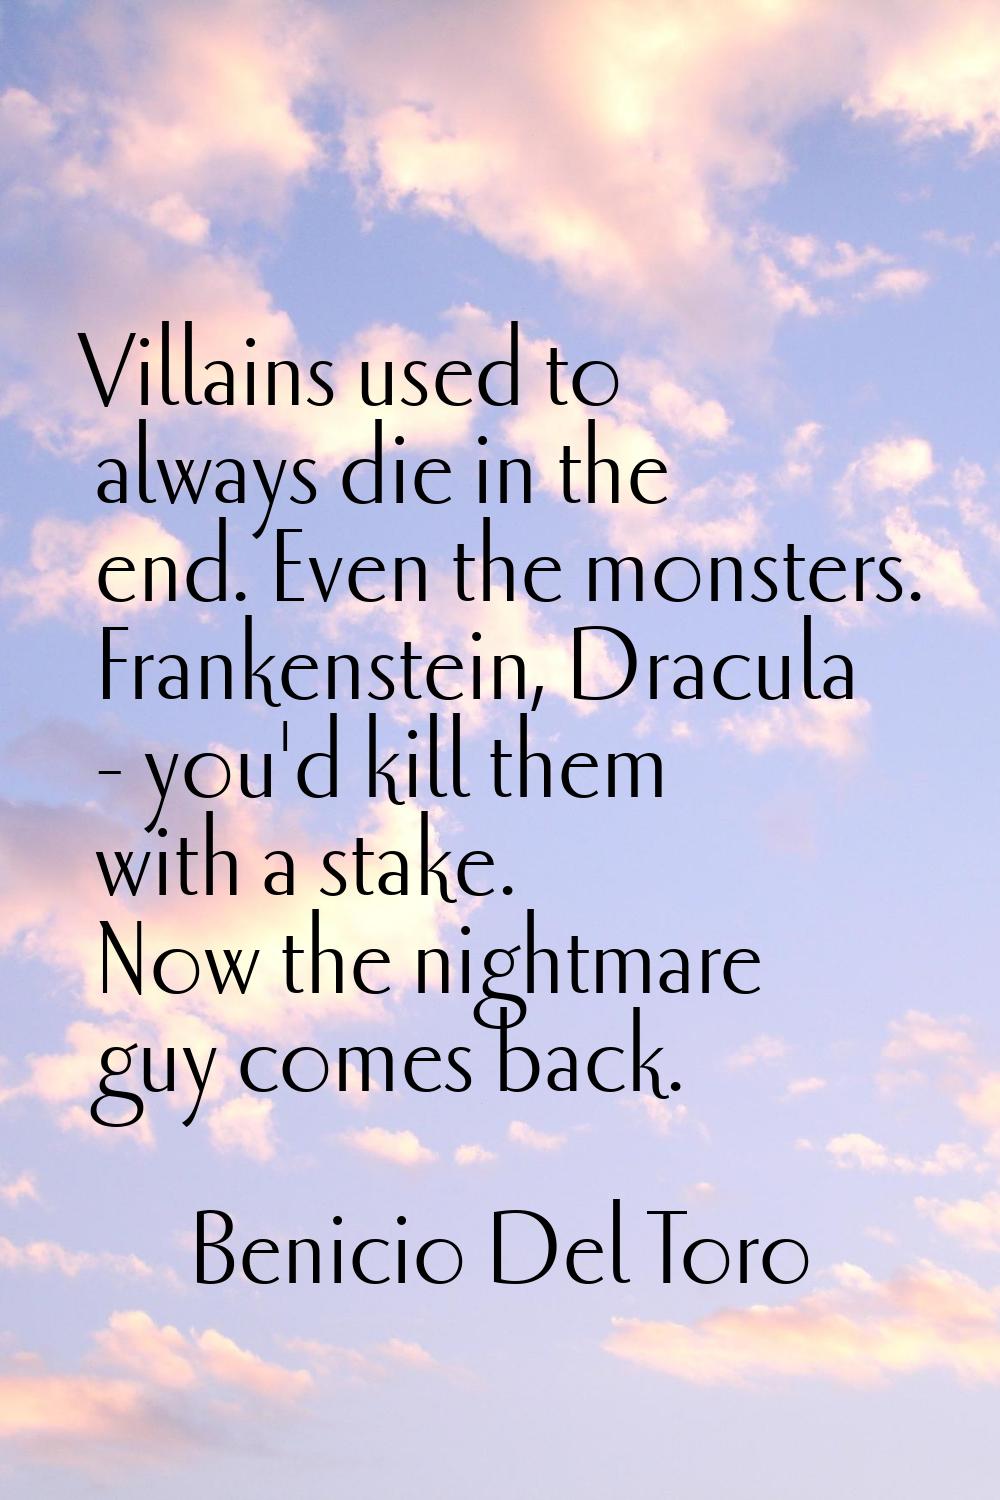 Villains used to always die in the end. Even the monsters. Frankenstein, Dracula - you'd kill them 